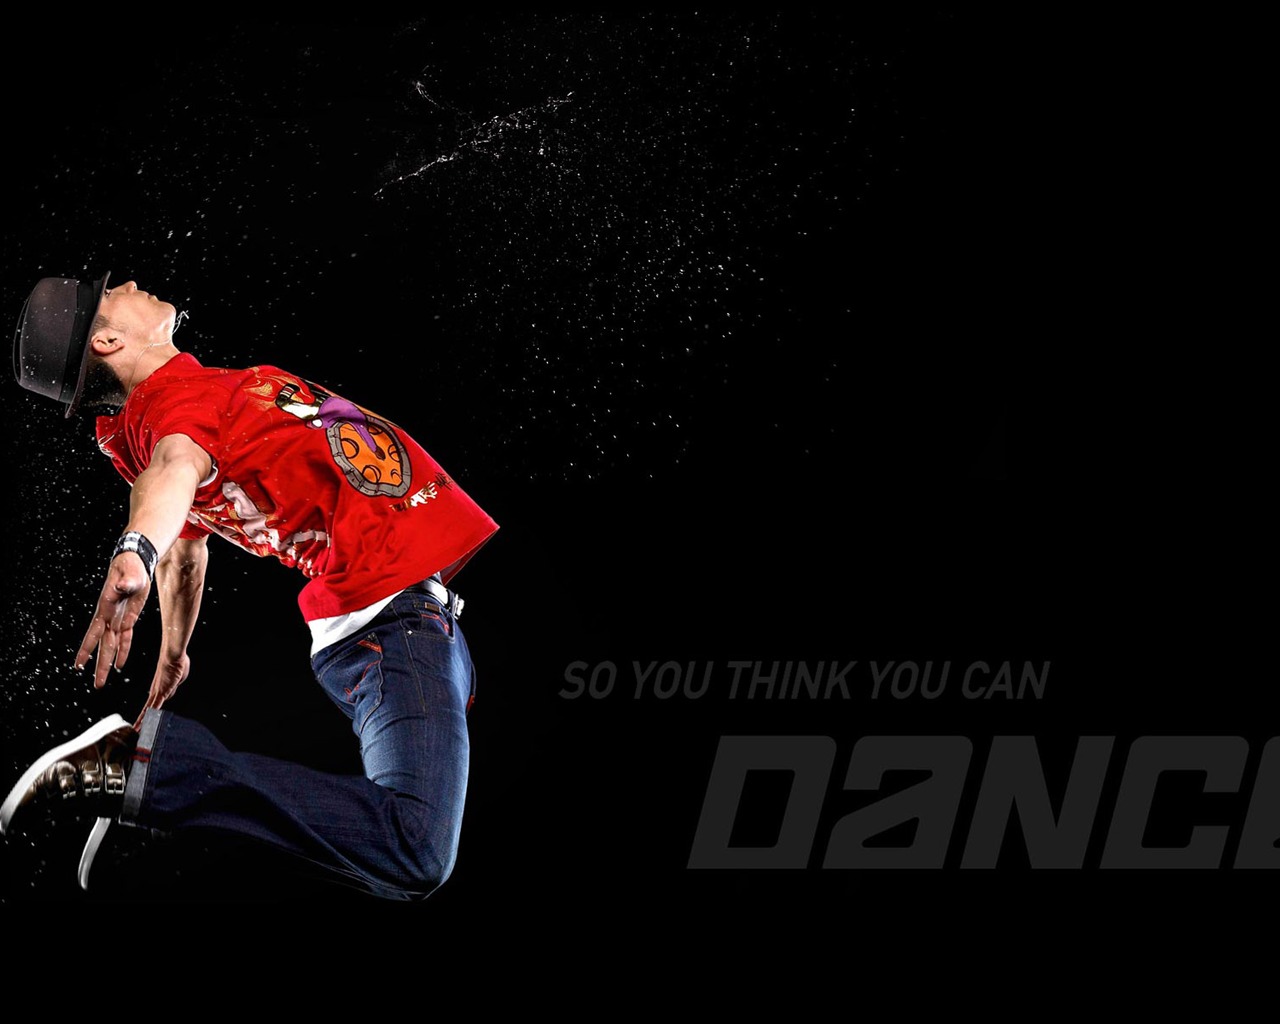 So You Think You Can Dance 舞林争霸 壁纸(一)6 - 1280x1024